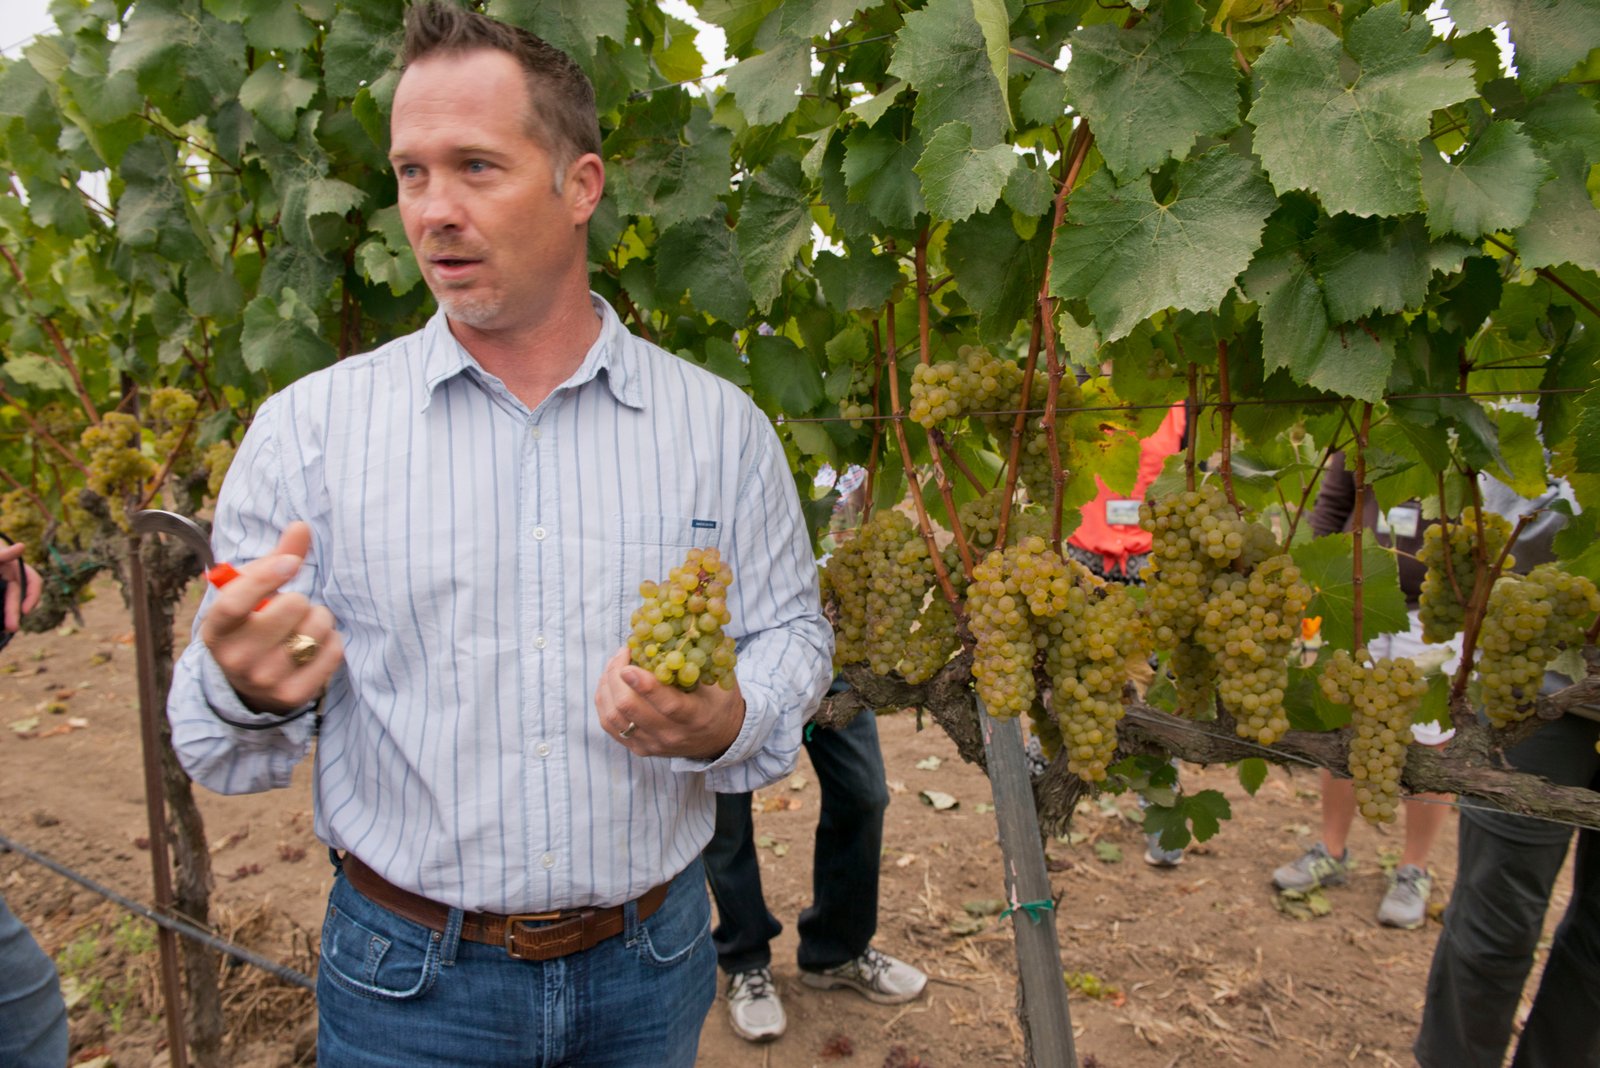 Toby Halkovich, director of vineyard operations for Cakebread Cellars, explains how the hand-harvesting process yields better wine.